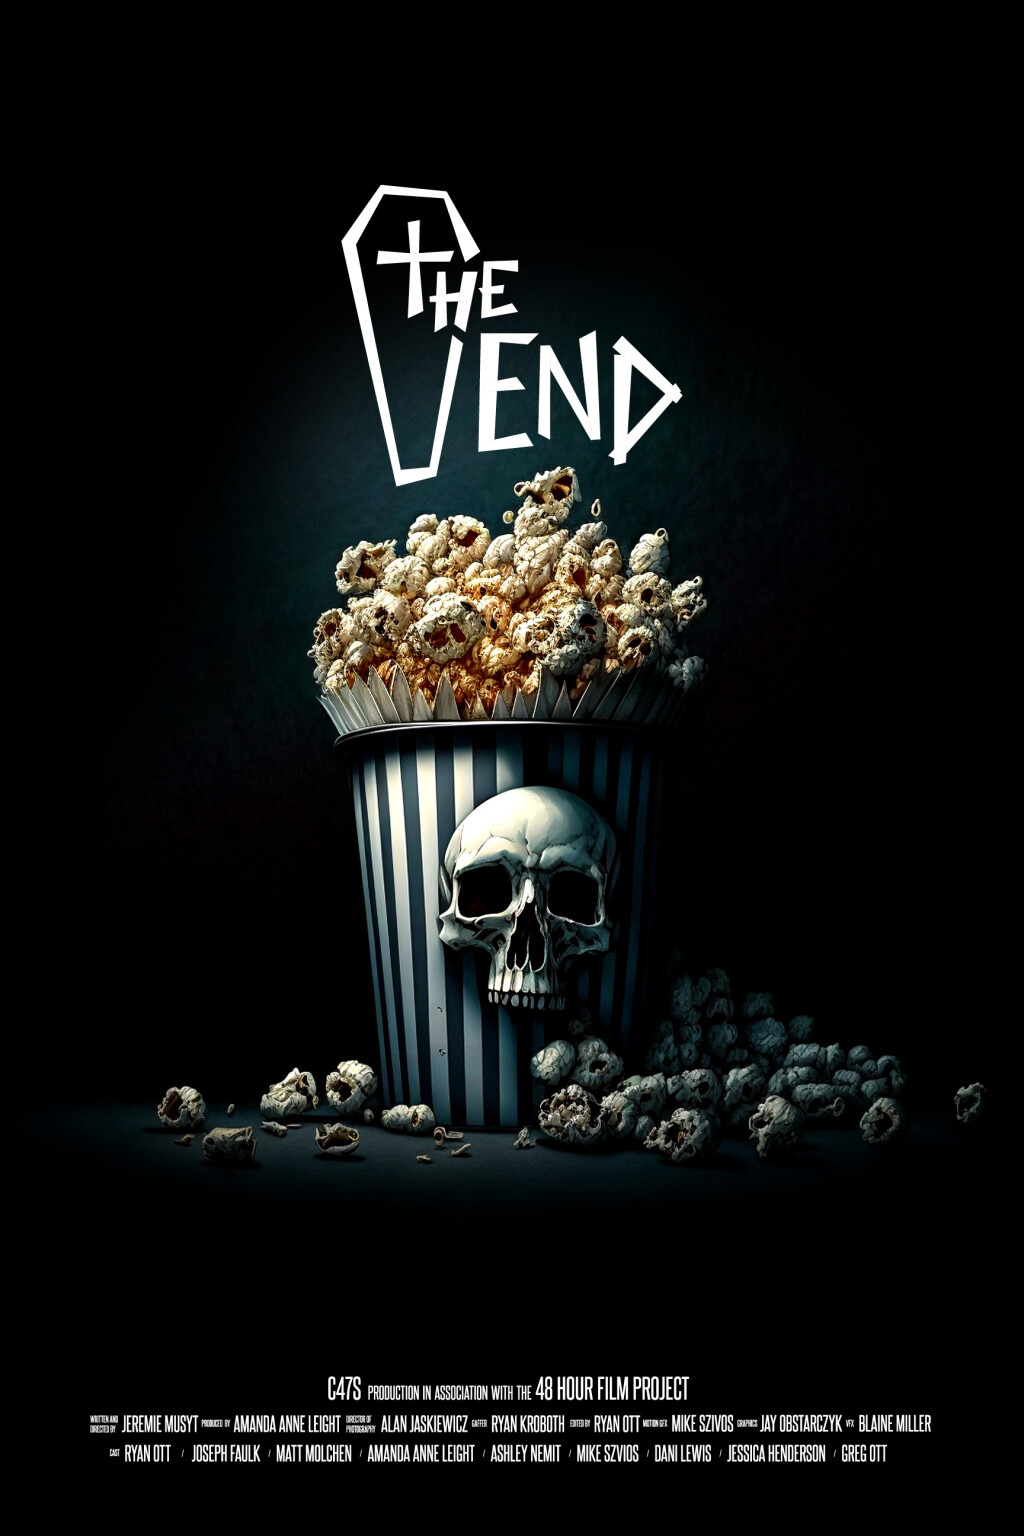 Filmposter for The End